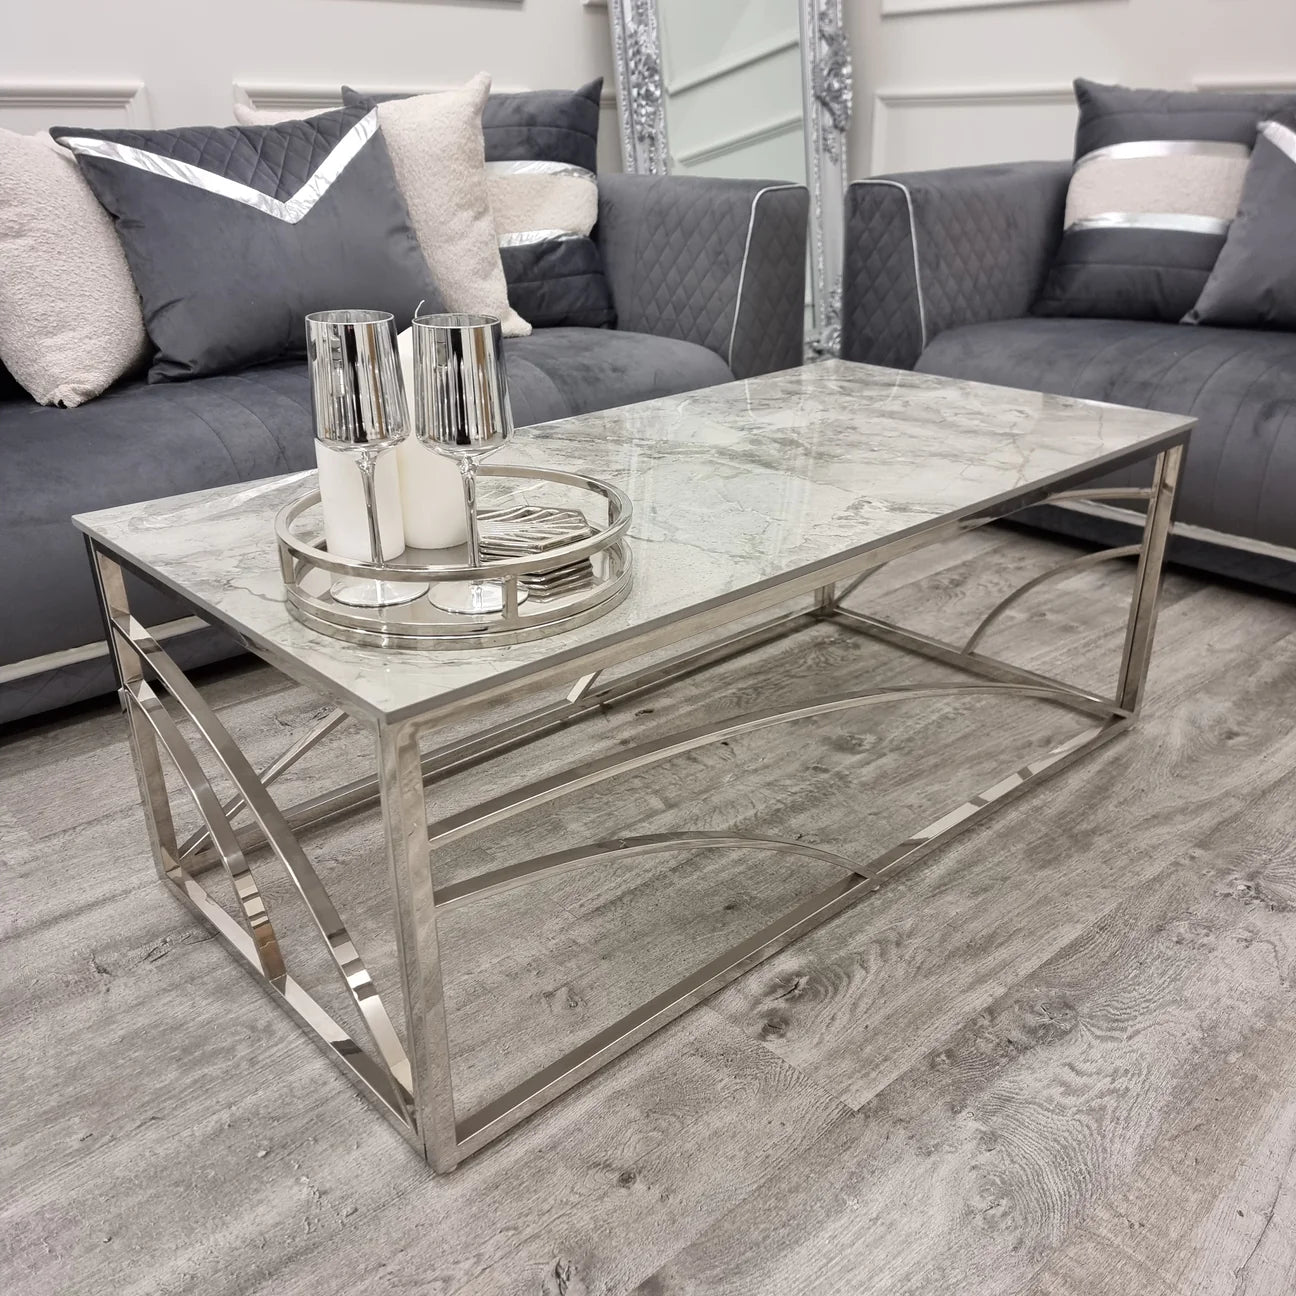 120cm Stella Chrome Coffee Table With Stomach Ash Grey Sintered Top